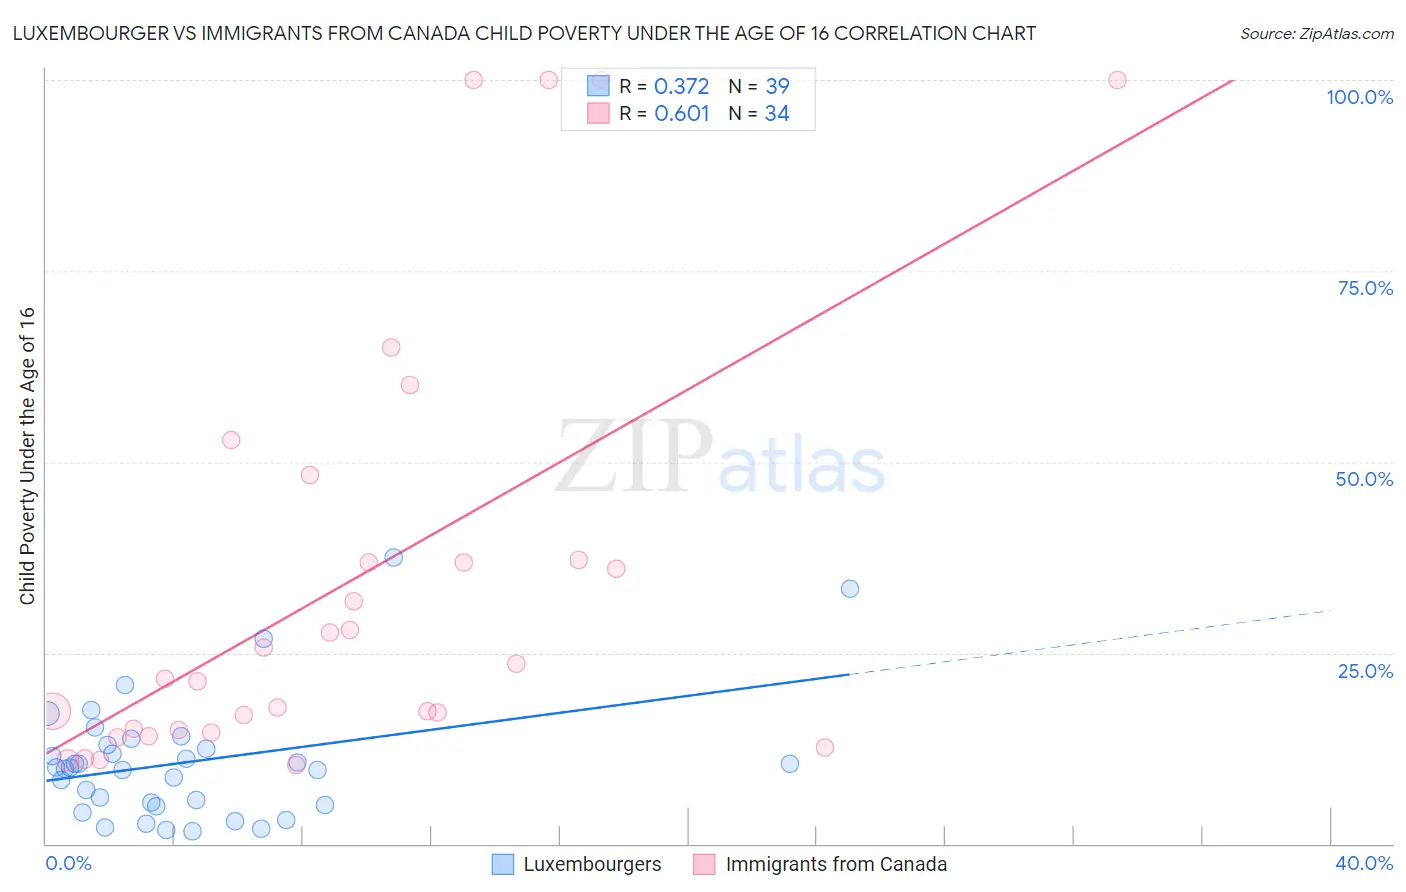 Luxembourger vs Immigrants from Canada Child Poverty Under the Age of 16